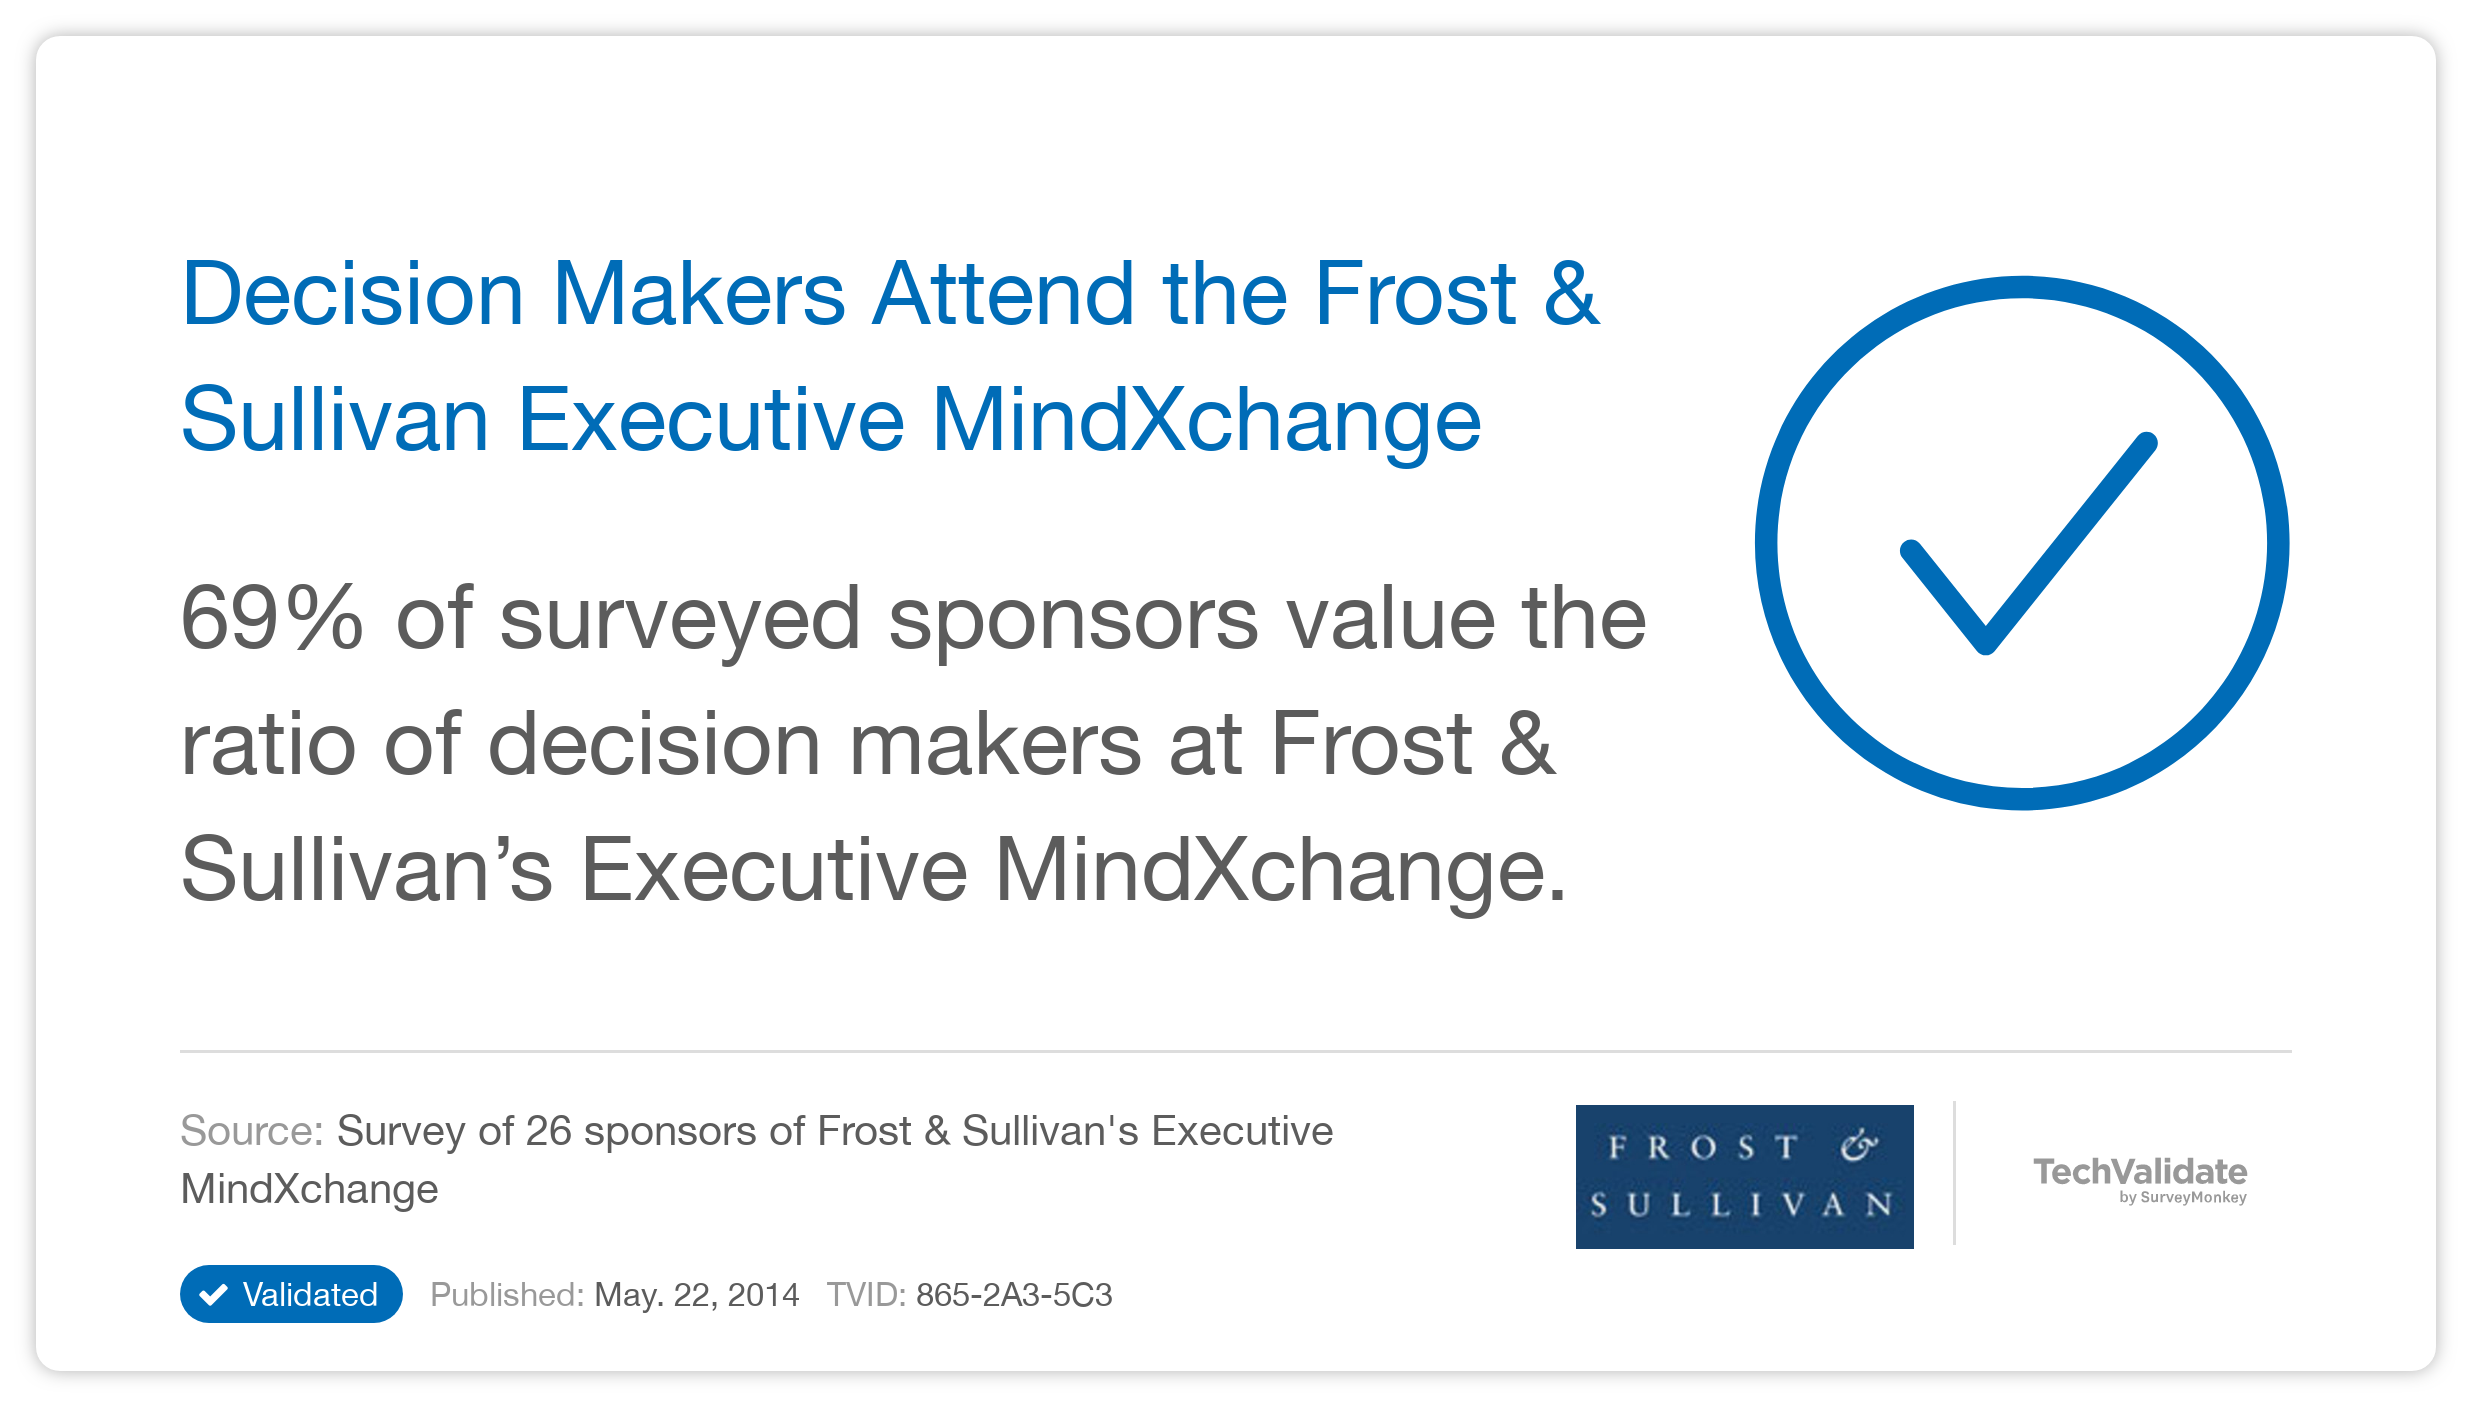 Decision Makers Attend the Frost & Sullivan Executive MindXchange